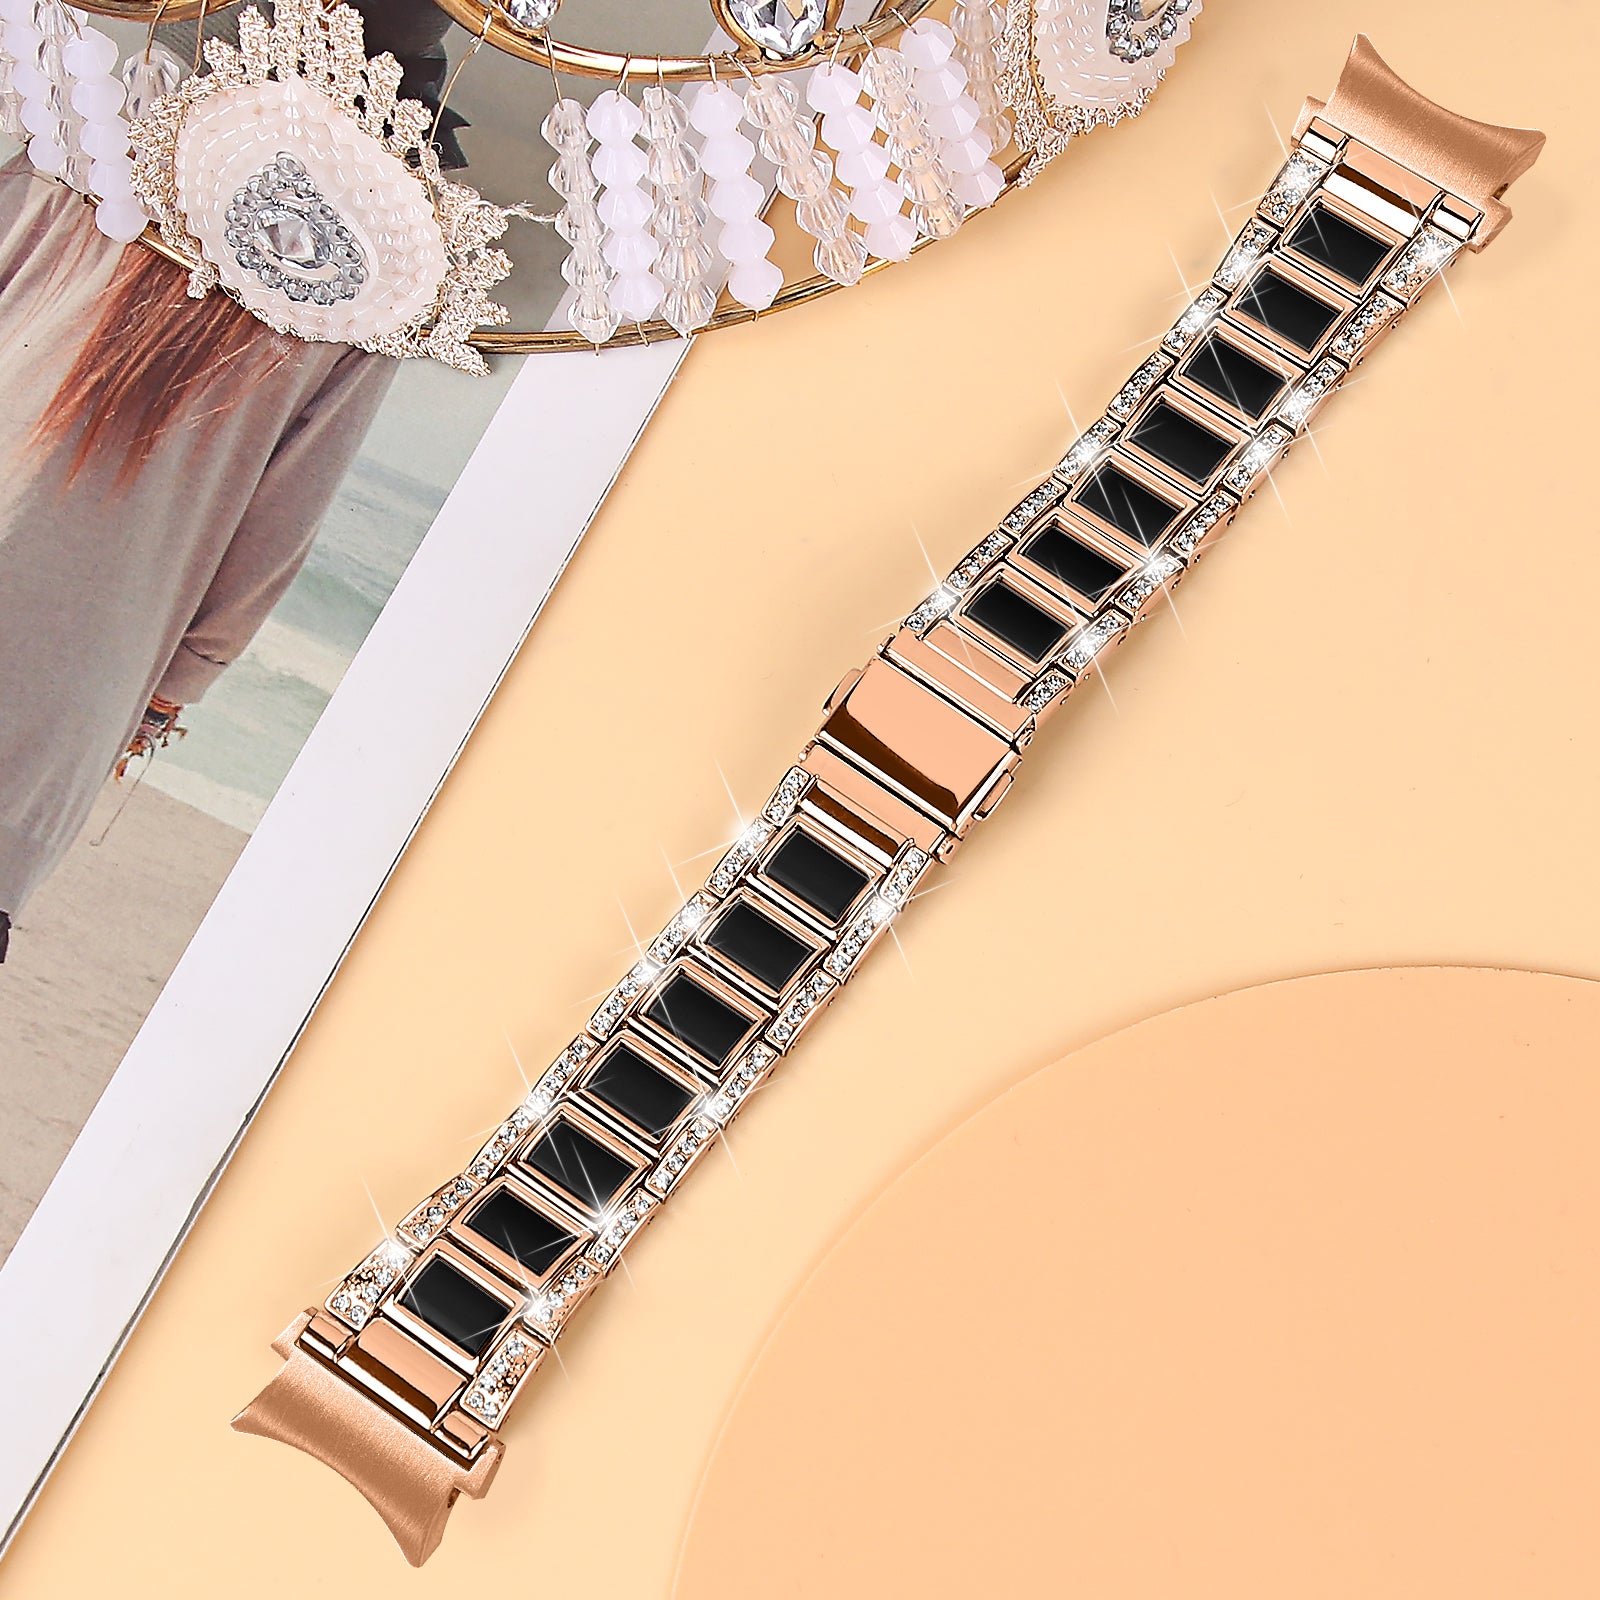 for Samsung Galaxy Watch4 Active 40mm/44mm/Watch4 Classic 42mm/46mm Rhinestone Decor Stainless Steel Resin Watch Band with Watch Strap Adapter - Rose Gold/Black